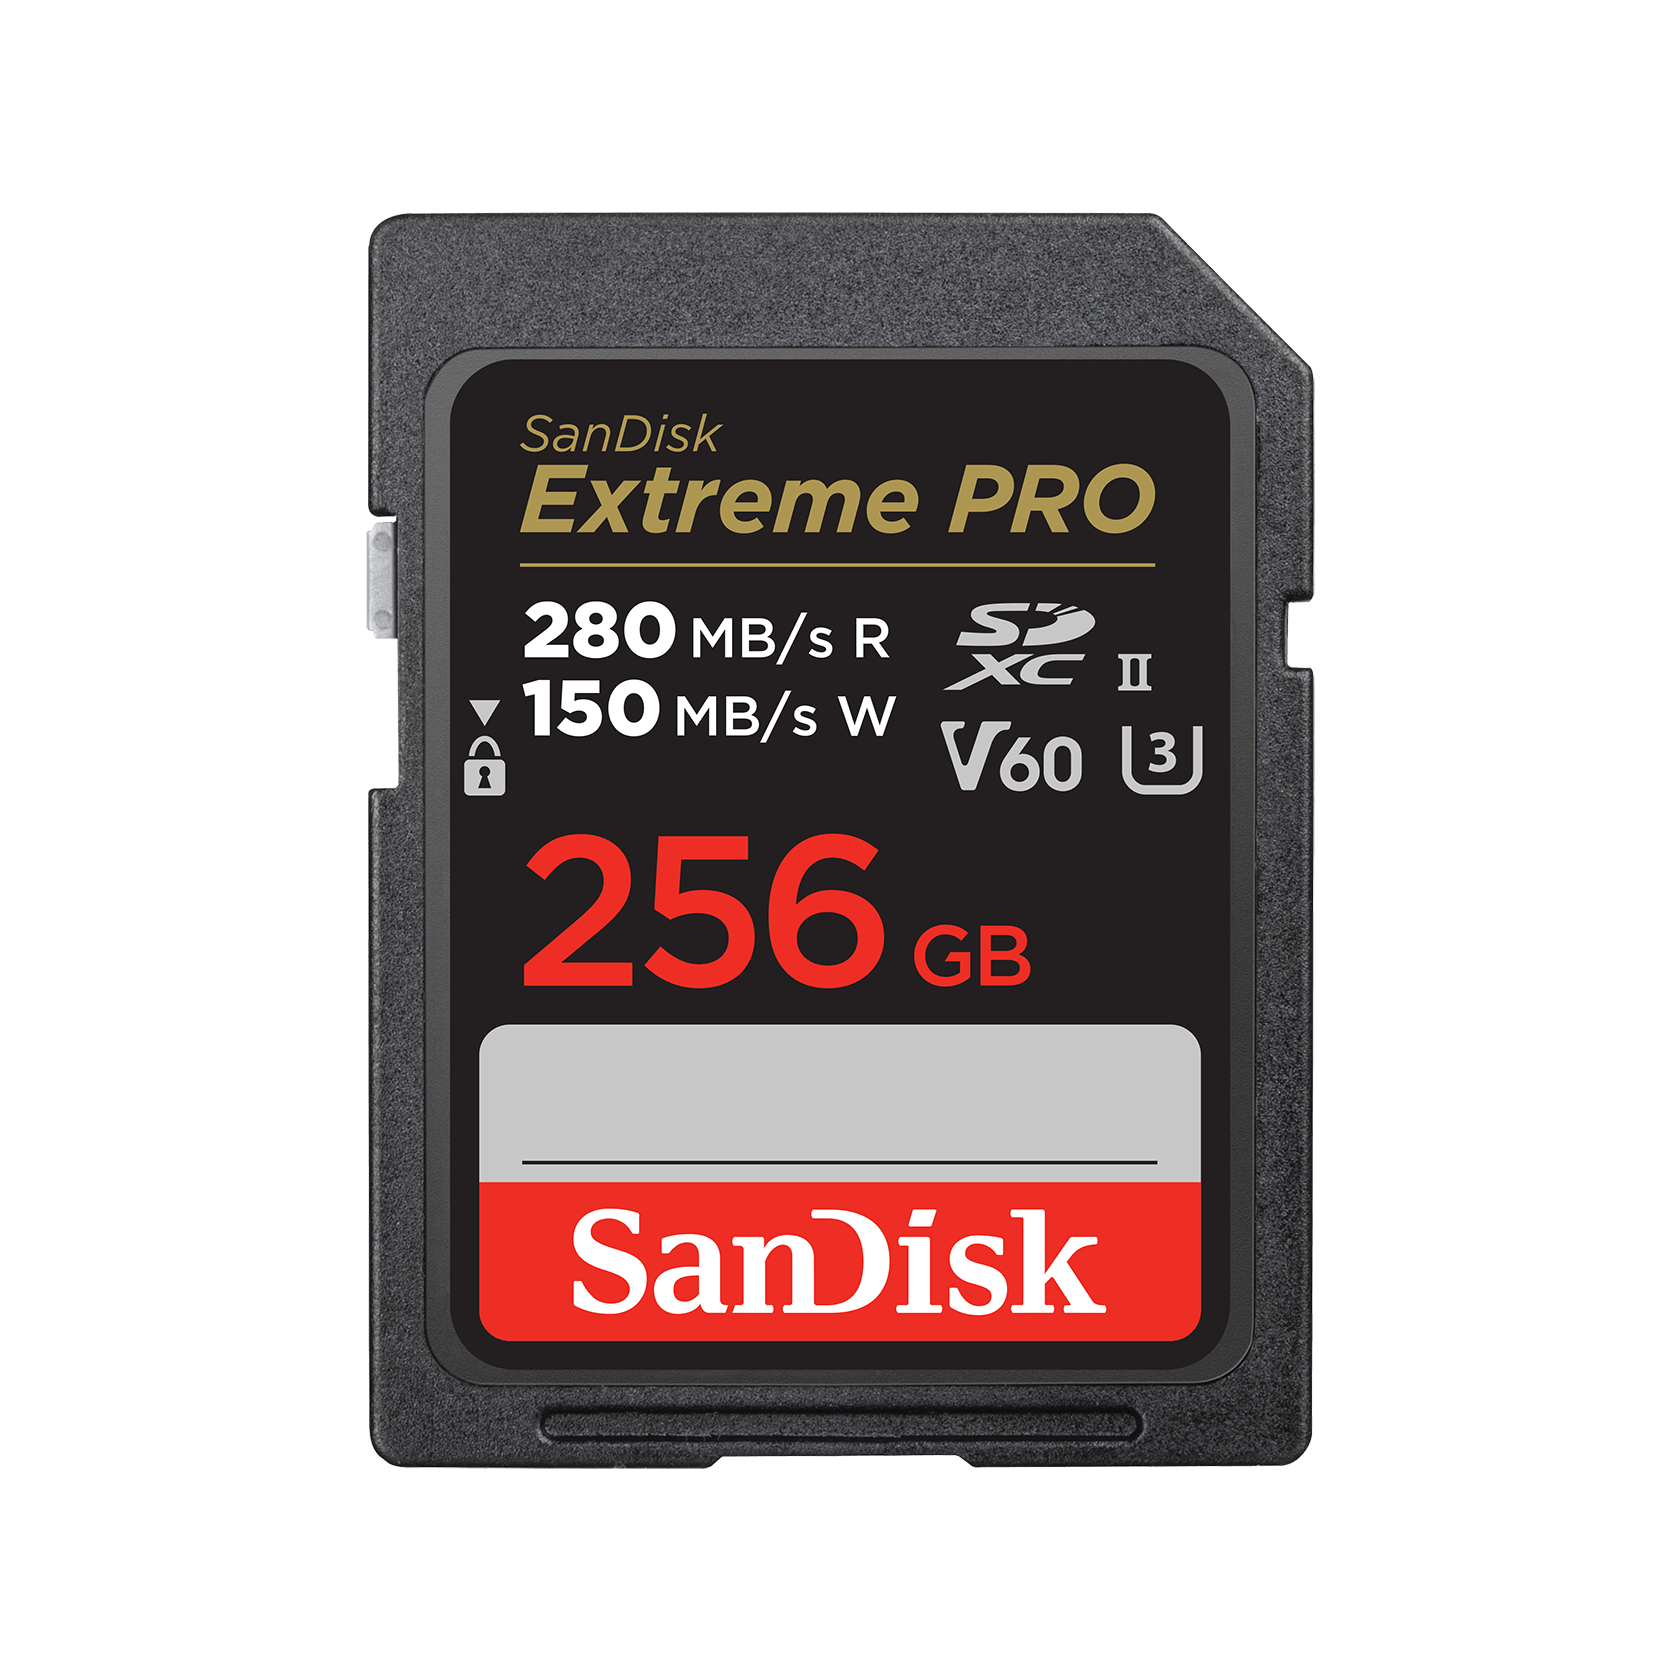 SanDisk Extreme PRO SDXC™ UHS-II Card - 256GB - SDSDXEP-256G-GN4IN